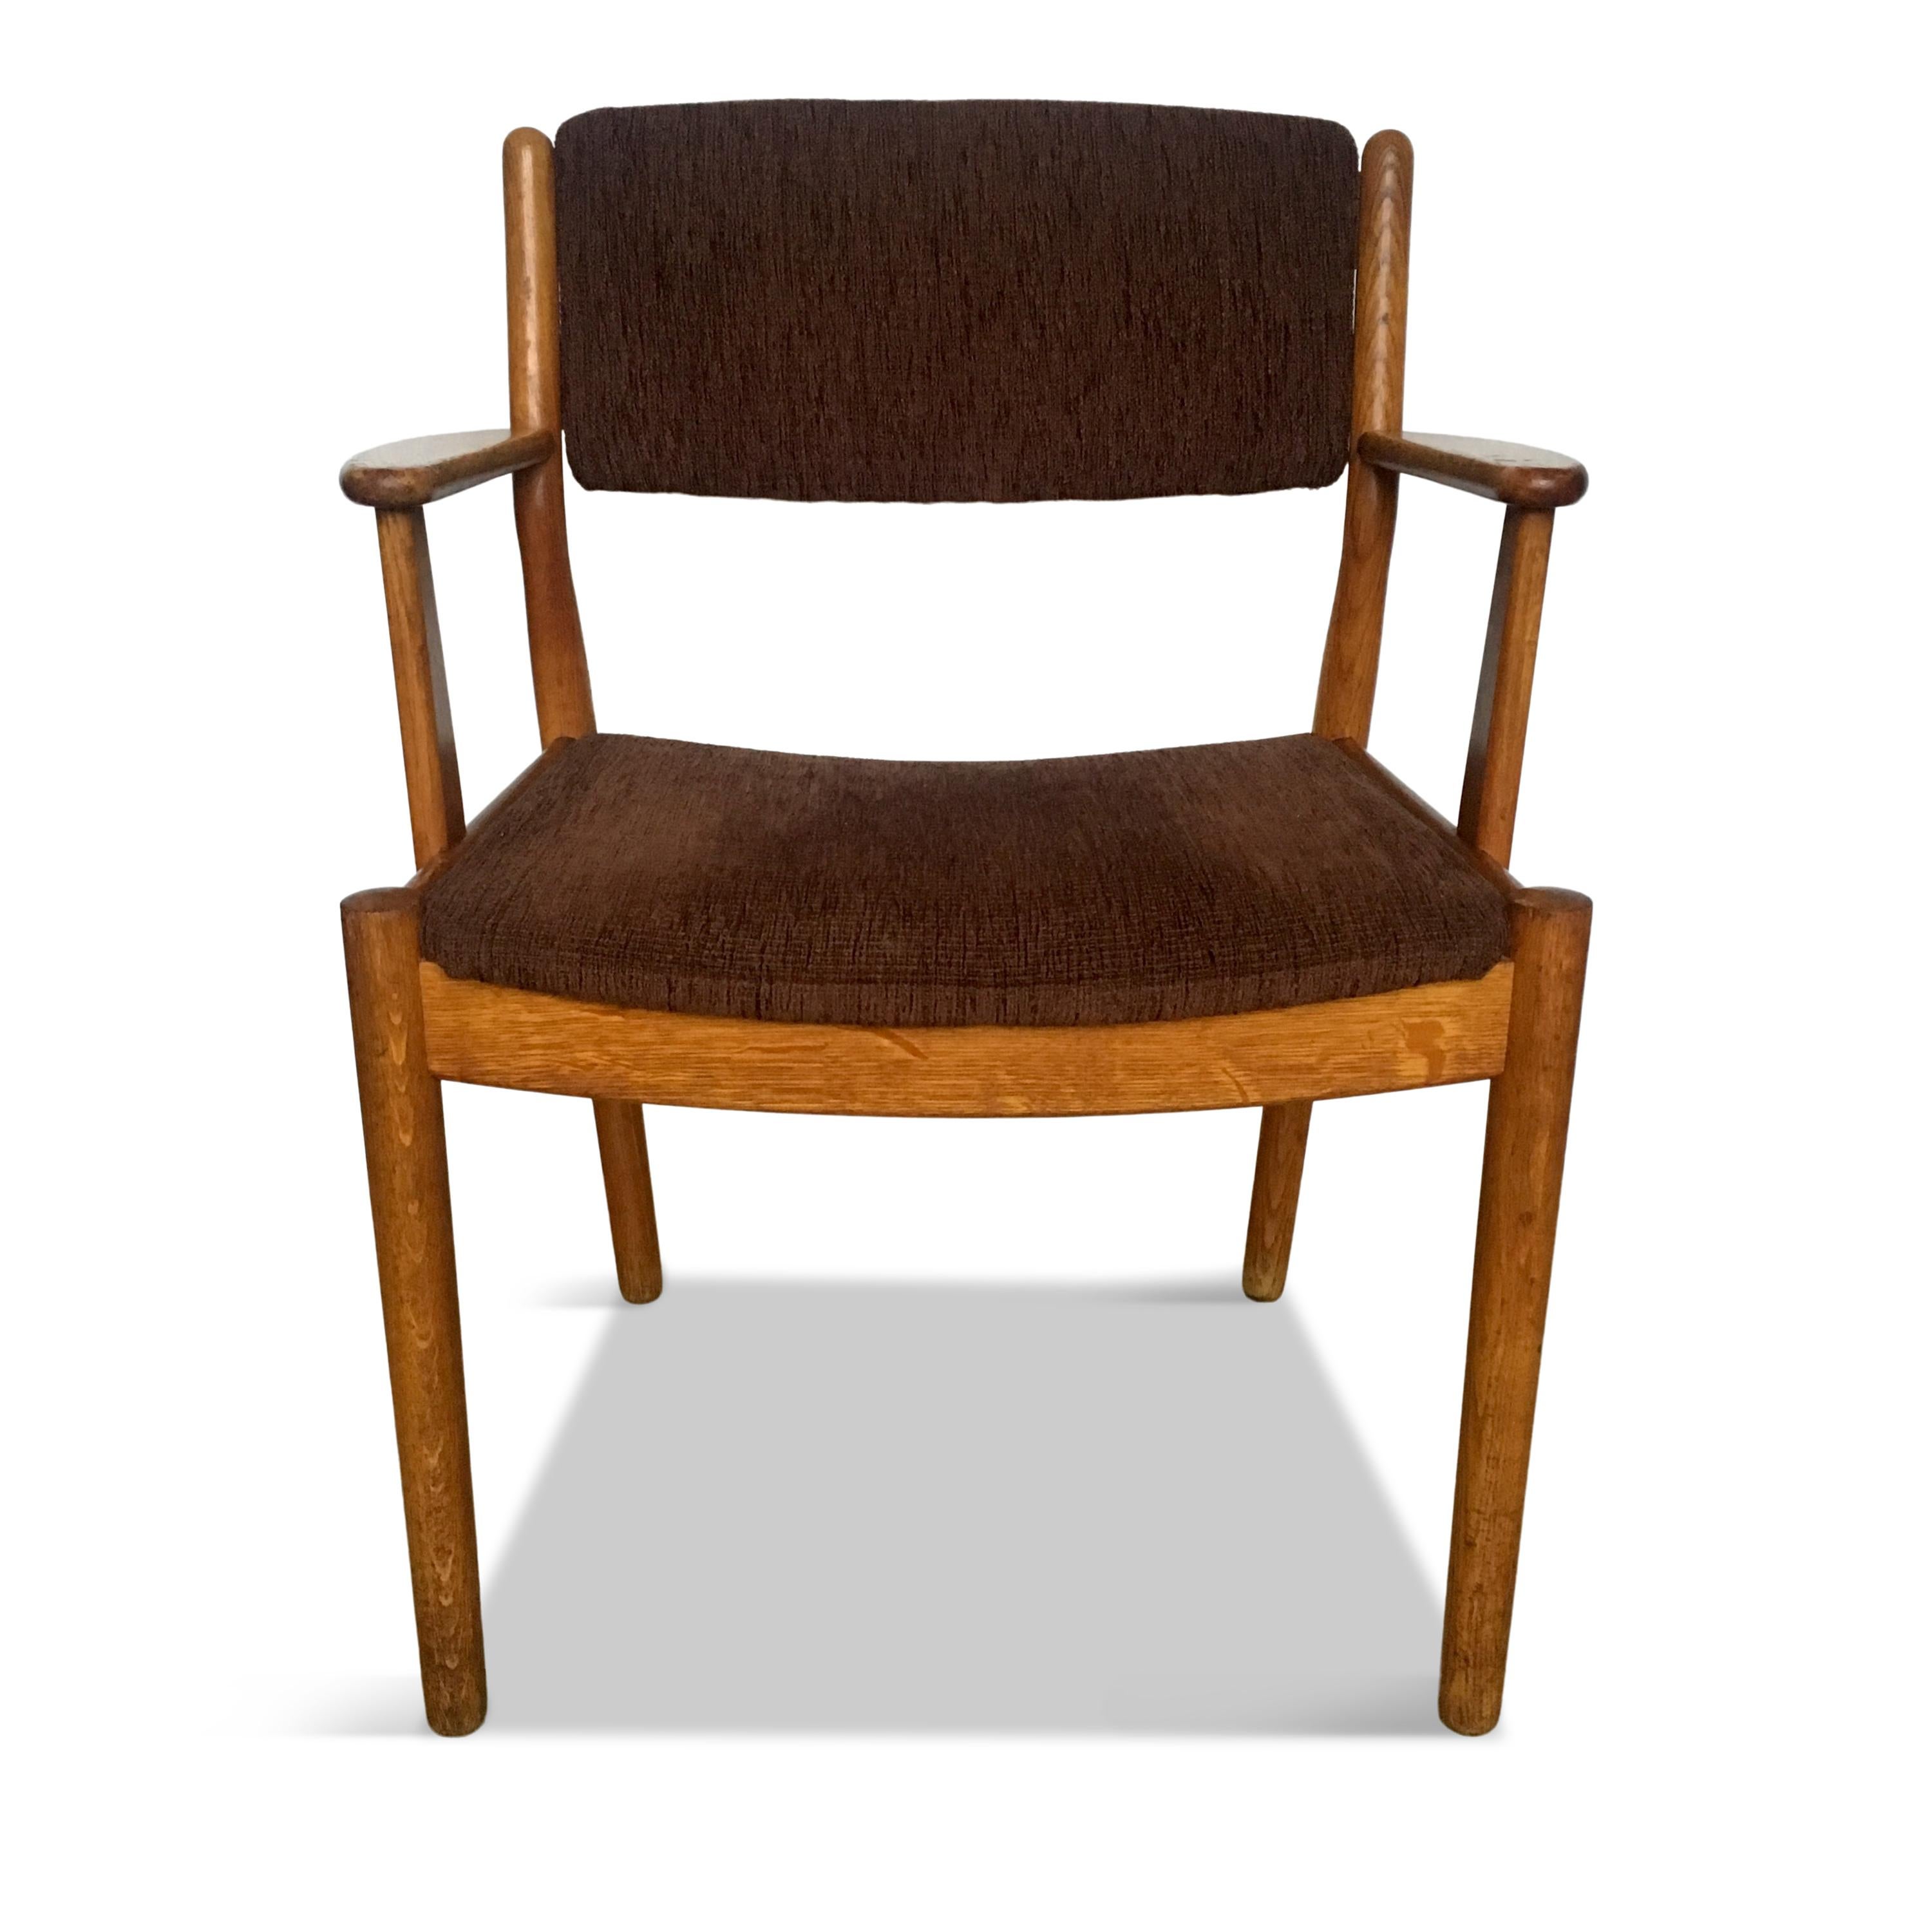 Fabric Midcentury Danish Oak Armchair by Poul Volther for FDB Møbler, 1950s For Sale